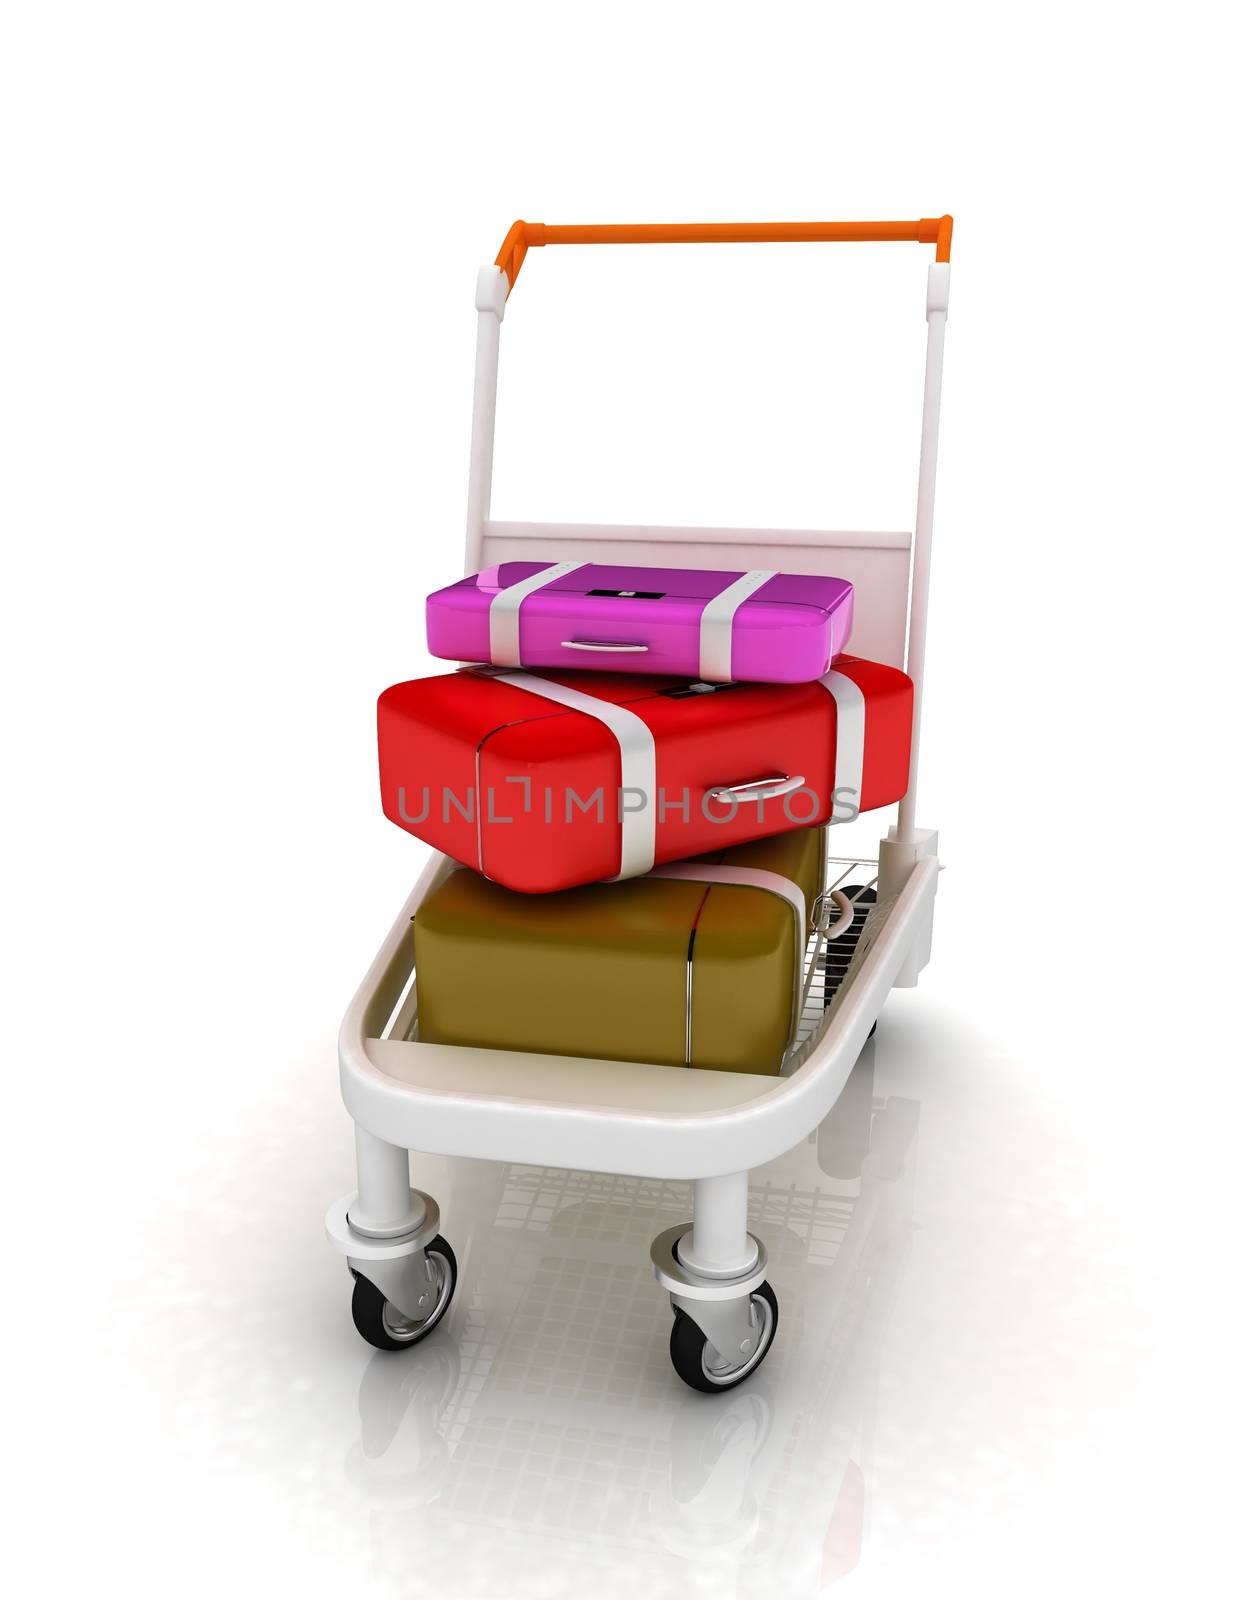 Trolley for luggage at the airport and luggage by Guru3D